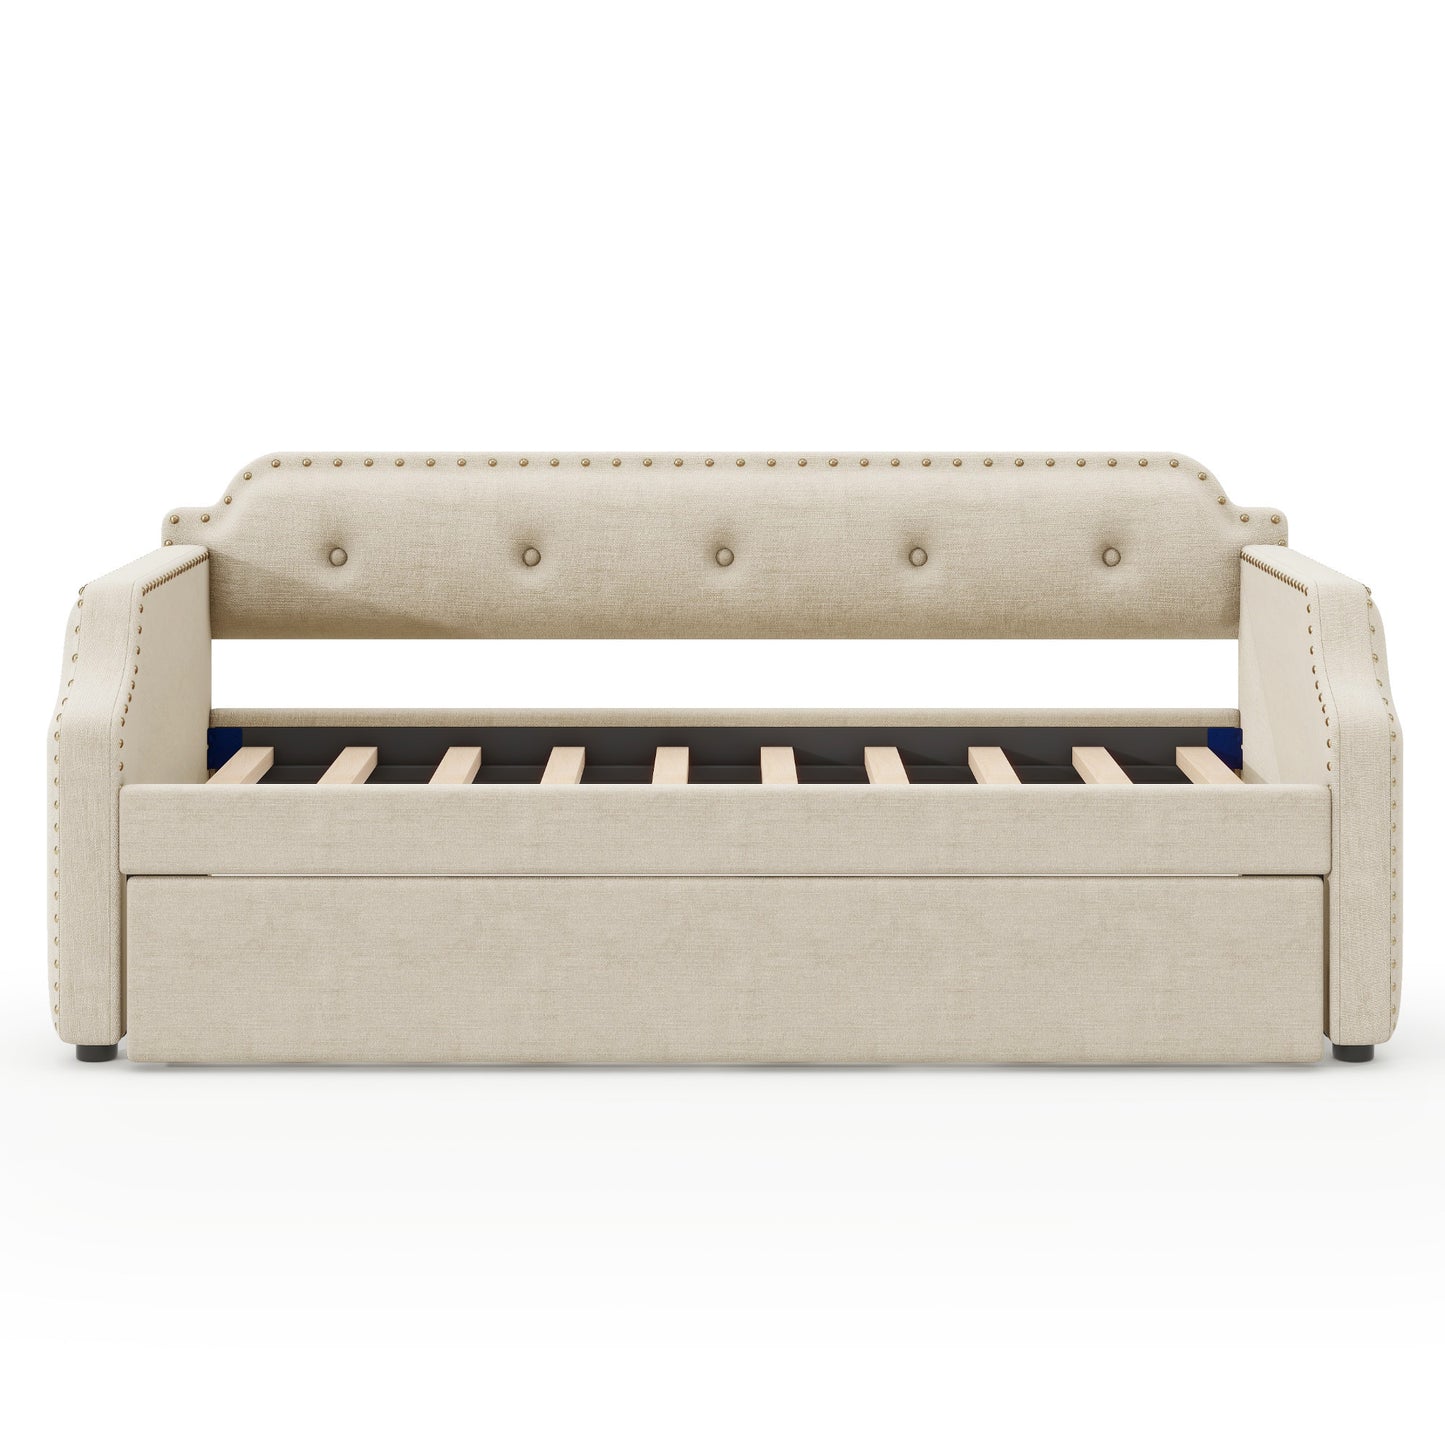 Upholstered Daybed with Trundle, Wood Slat Support,Upholstered Frame Sofa Bed, Twin, Beige(Expected Arrival Time: 1.23)